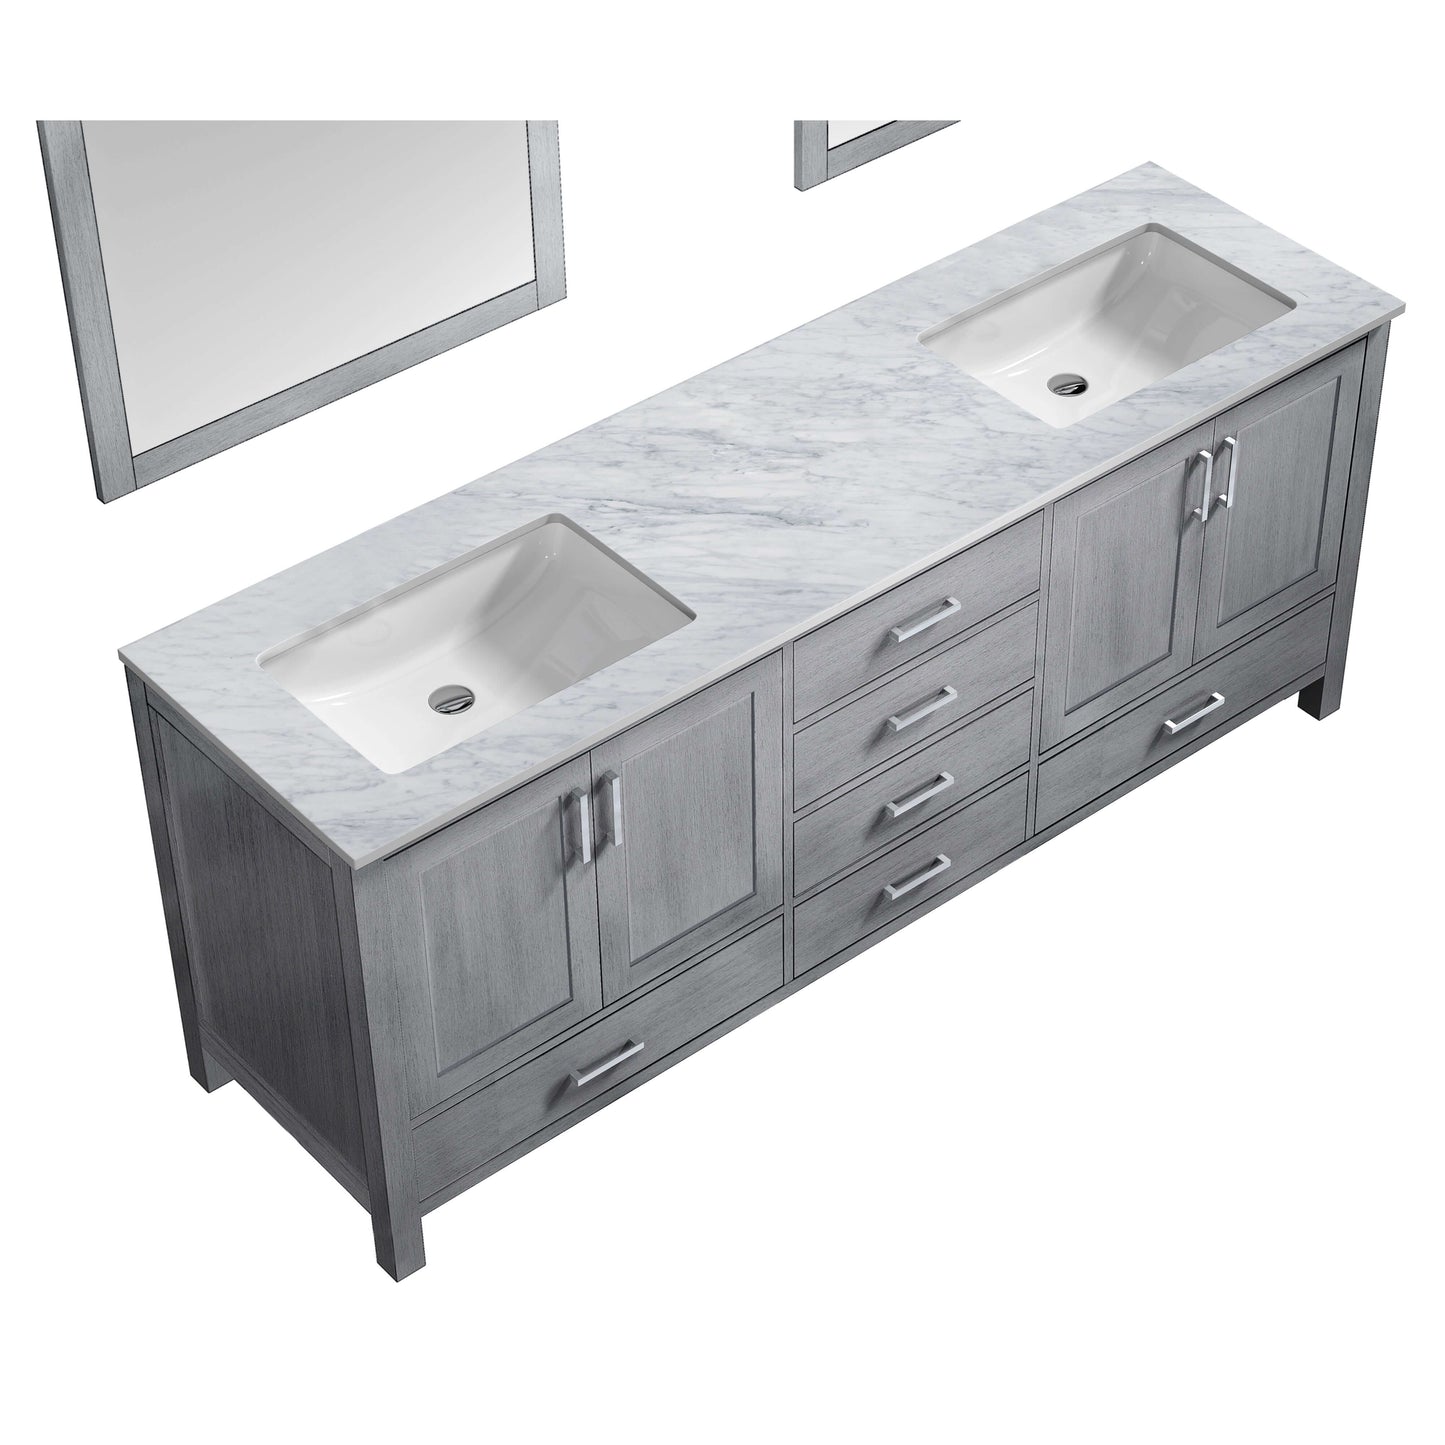 Jacques 80" Distressed Grey Double Vanity, White Carrara Marble Top, White Square Sinks and 30" Mirrors - LJ342280DDDSM30